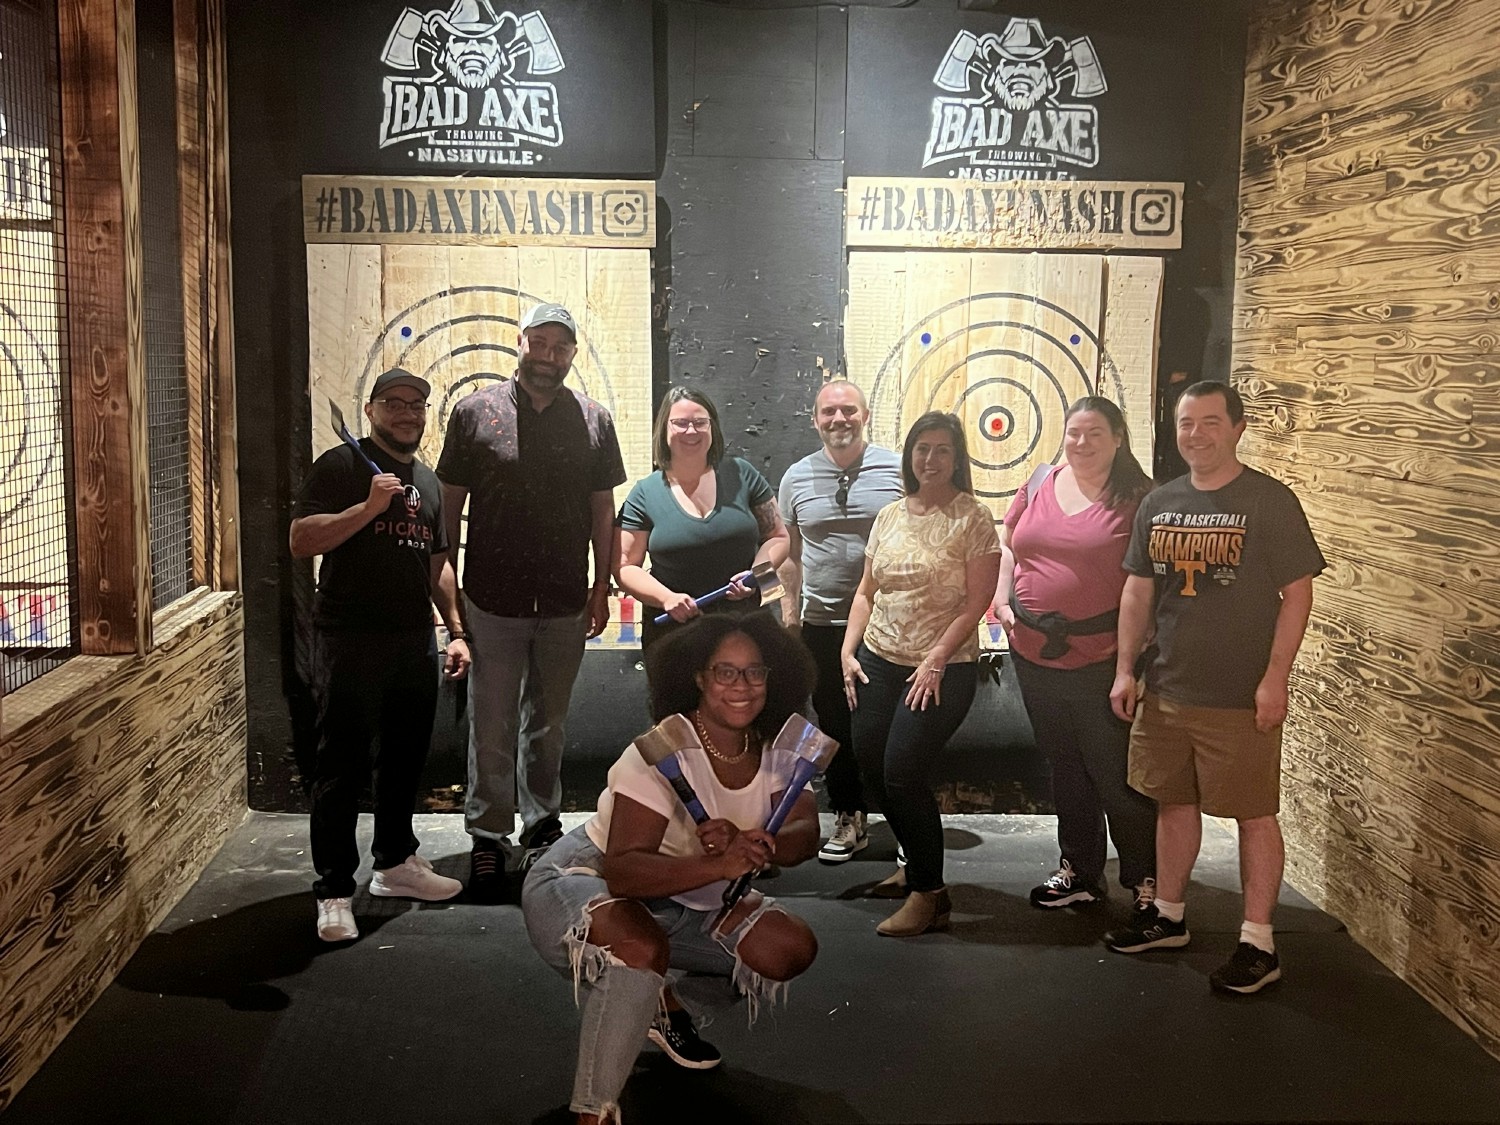 Our Professional Services team challenged each other to an ax throwing competition at our Team Night event